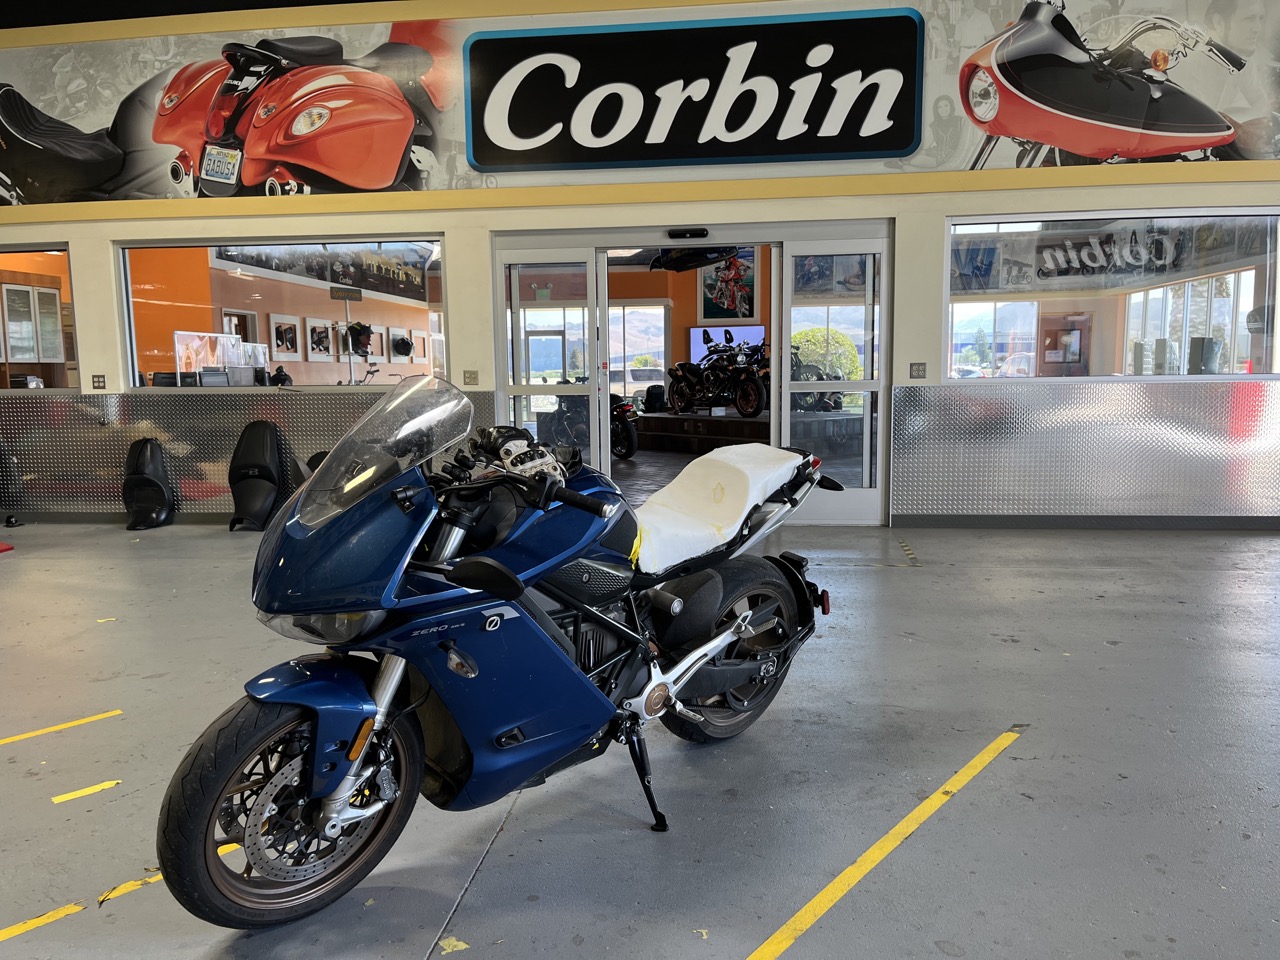 my Zero SR/S, with a raw foam seat, parked under the Corbin banner in their ride-in service area